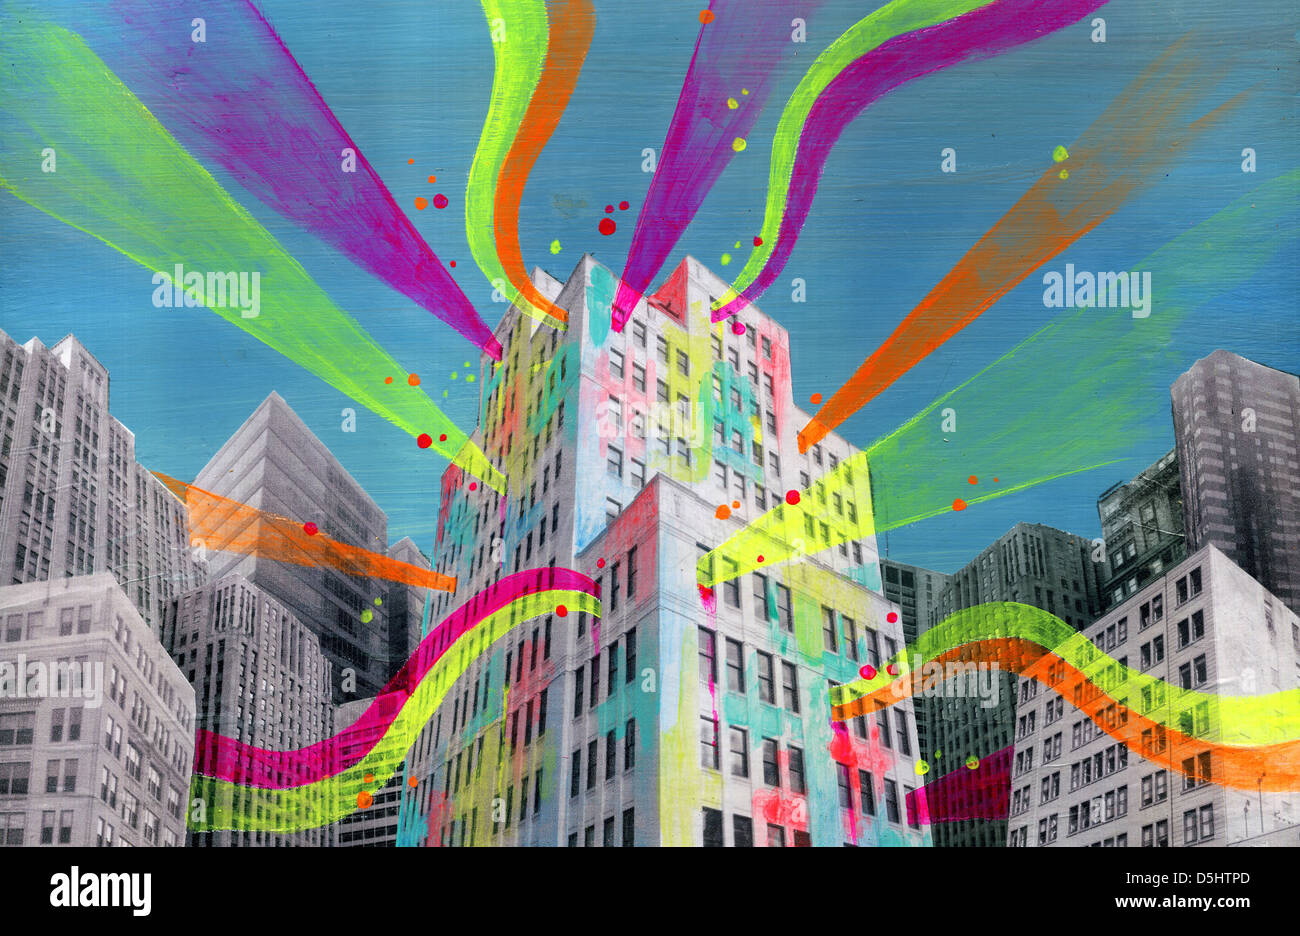 Illustration of building emitting lights representing social networking Stock Photo